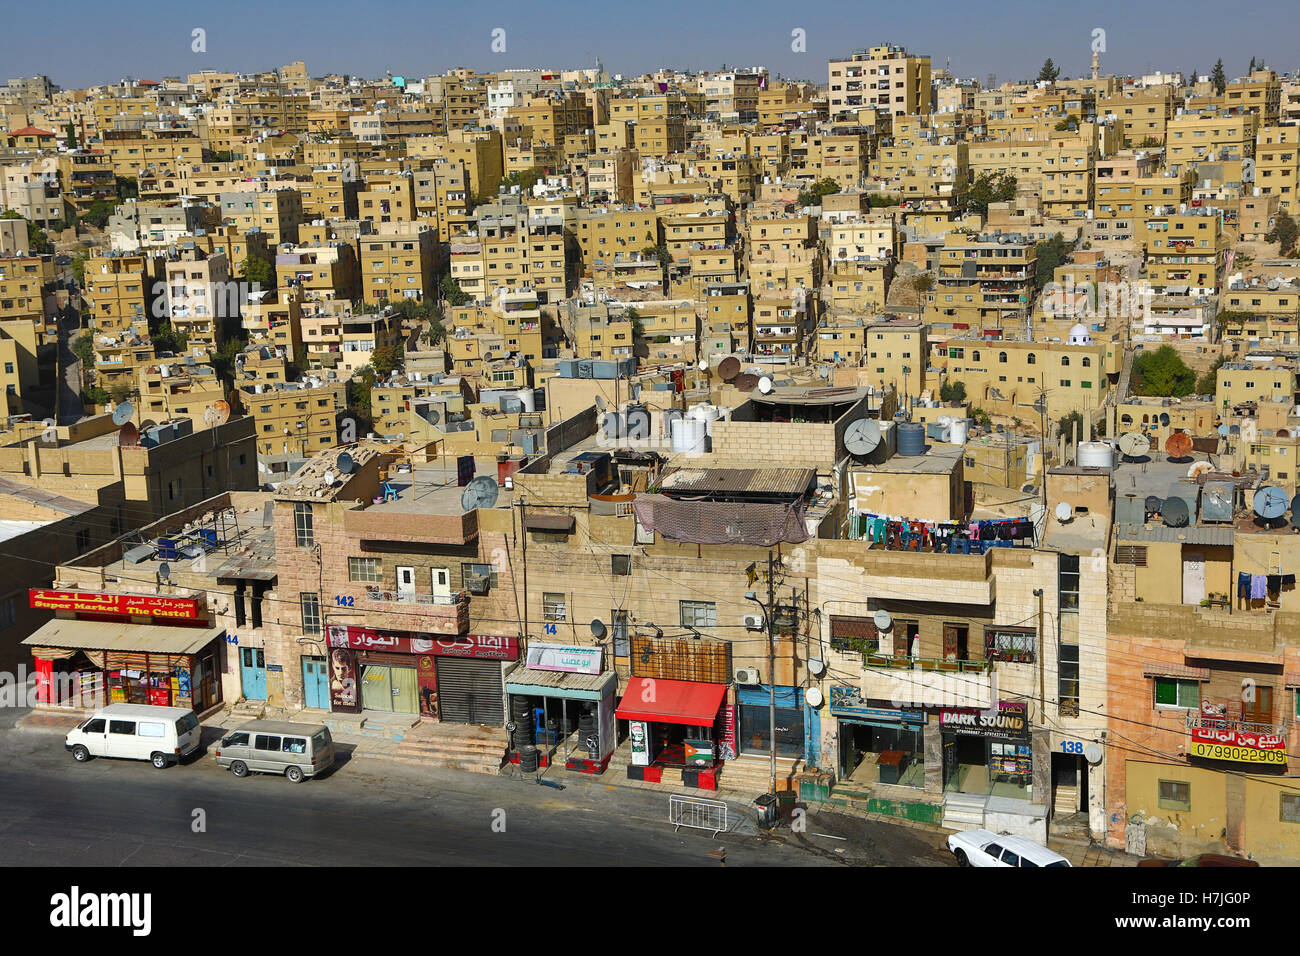 Cityscape of houses and buildings in the Old City, Amman, Jordan Stock Photo